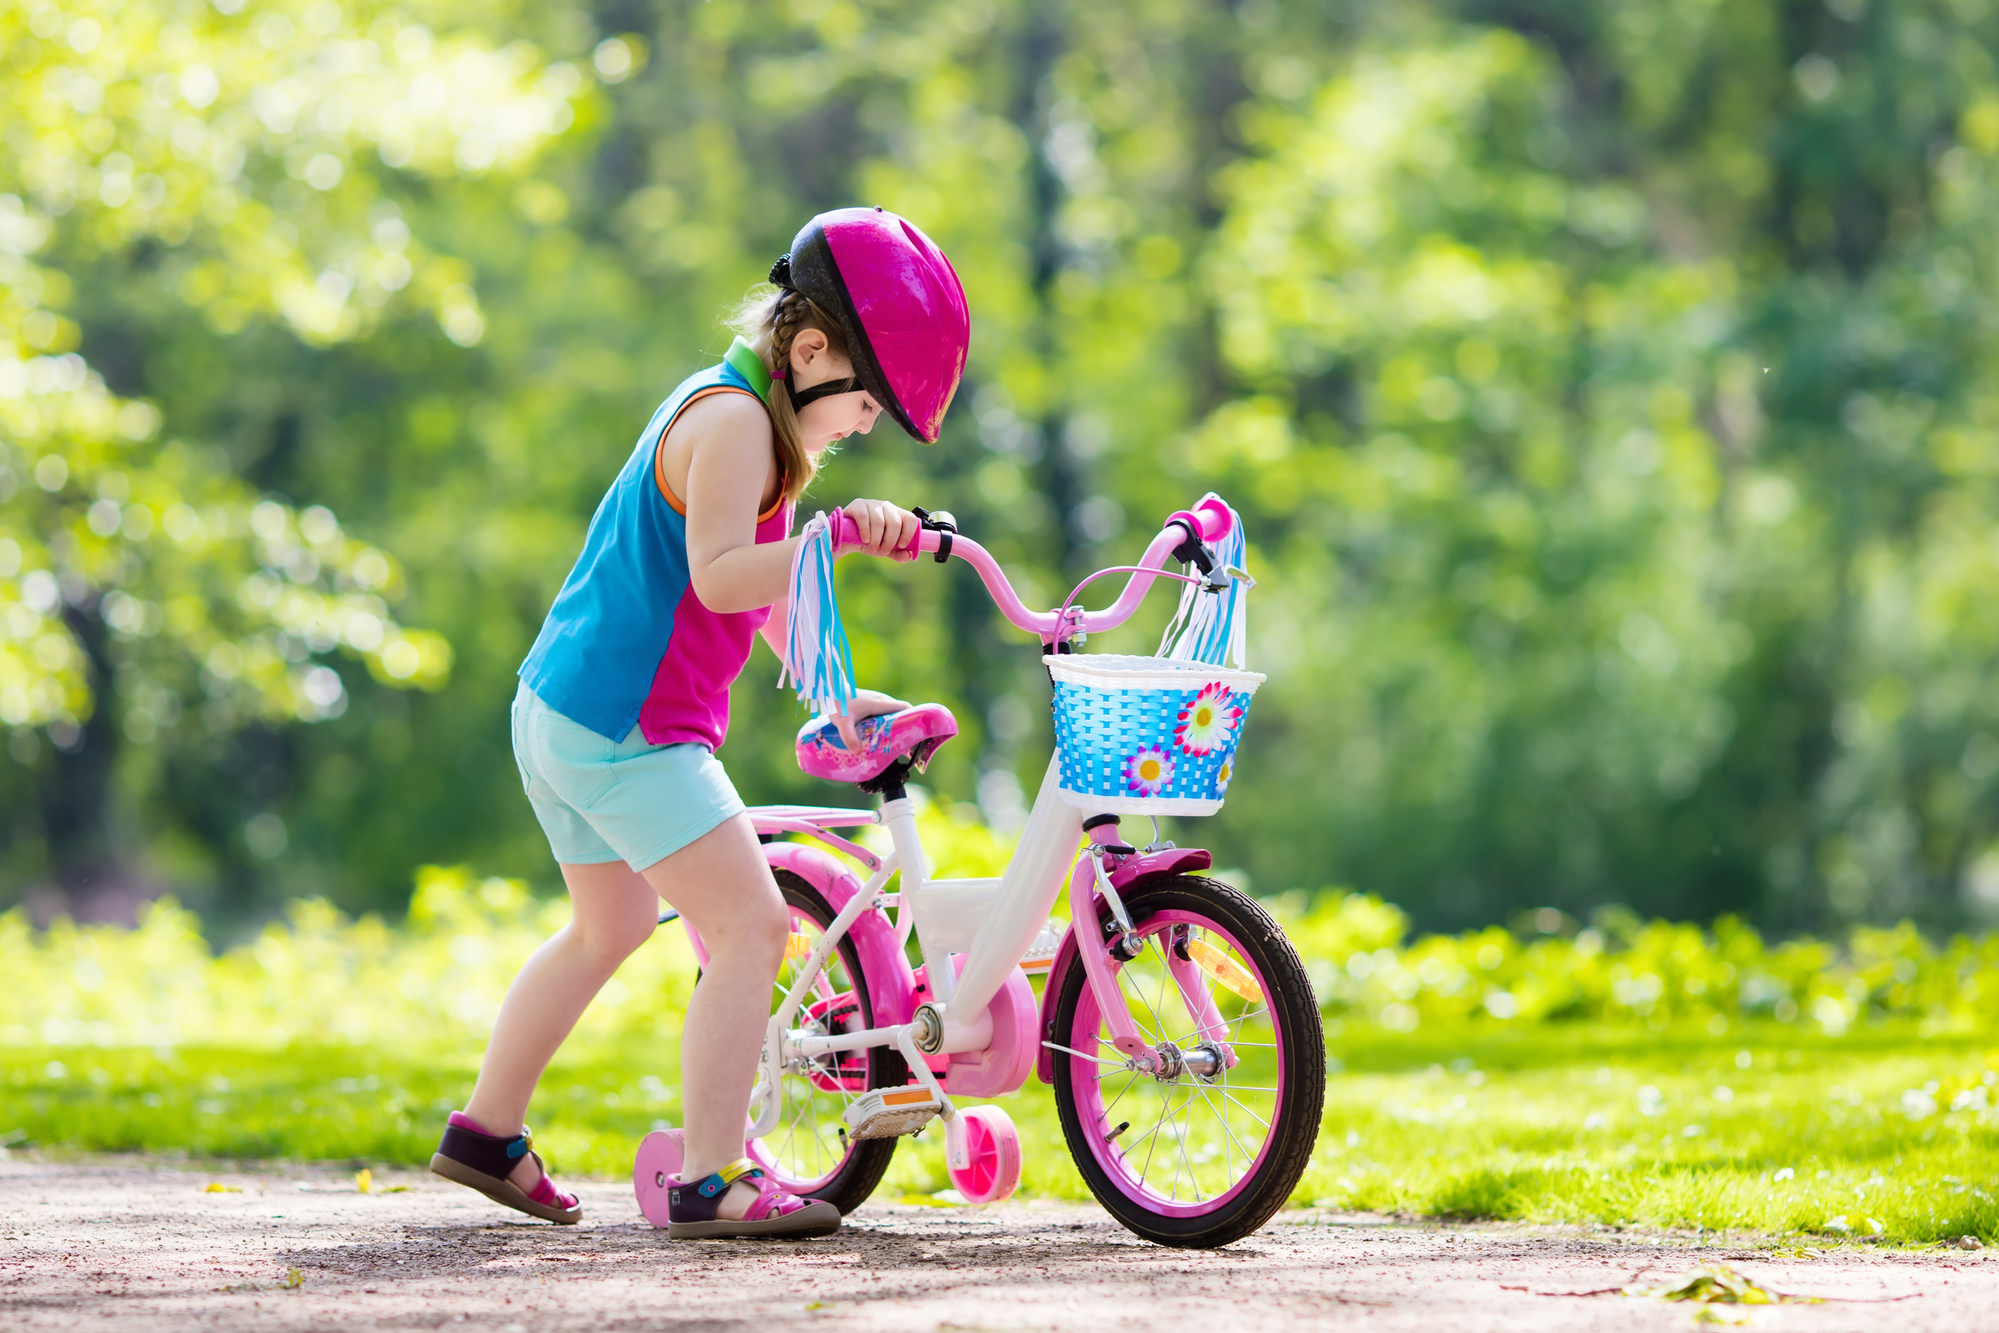 what size bike do i need for a 3 year old